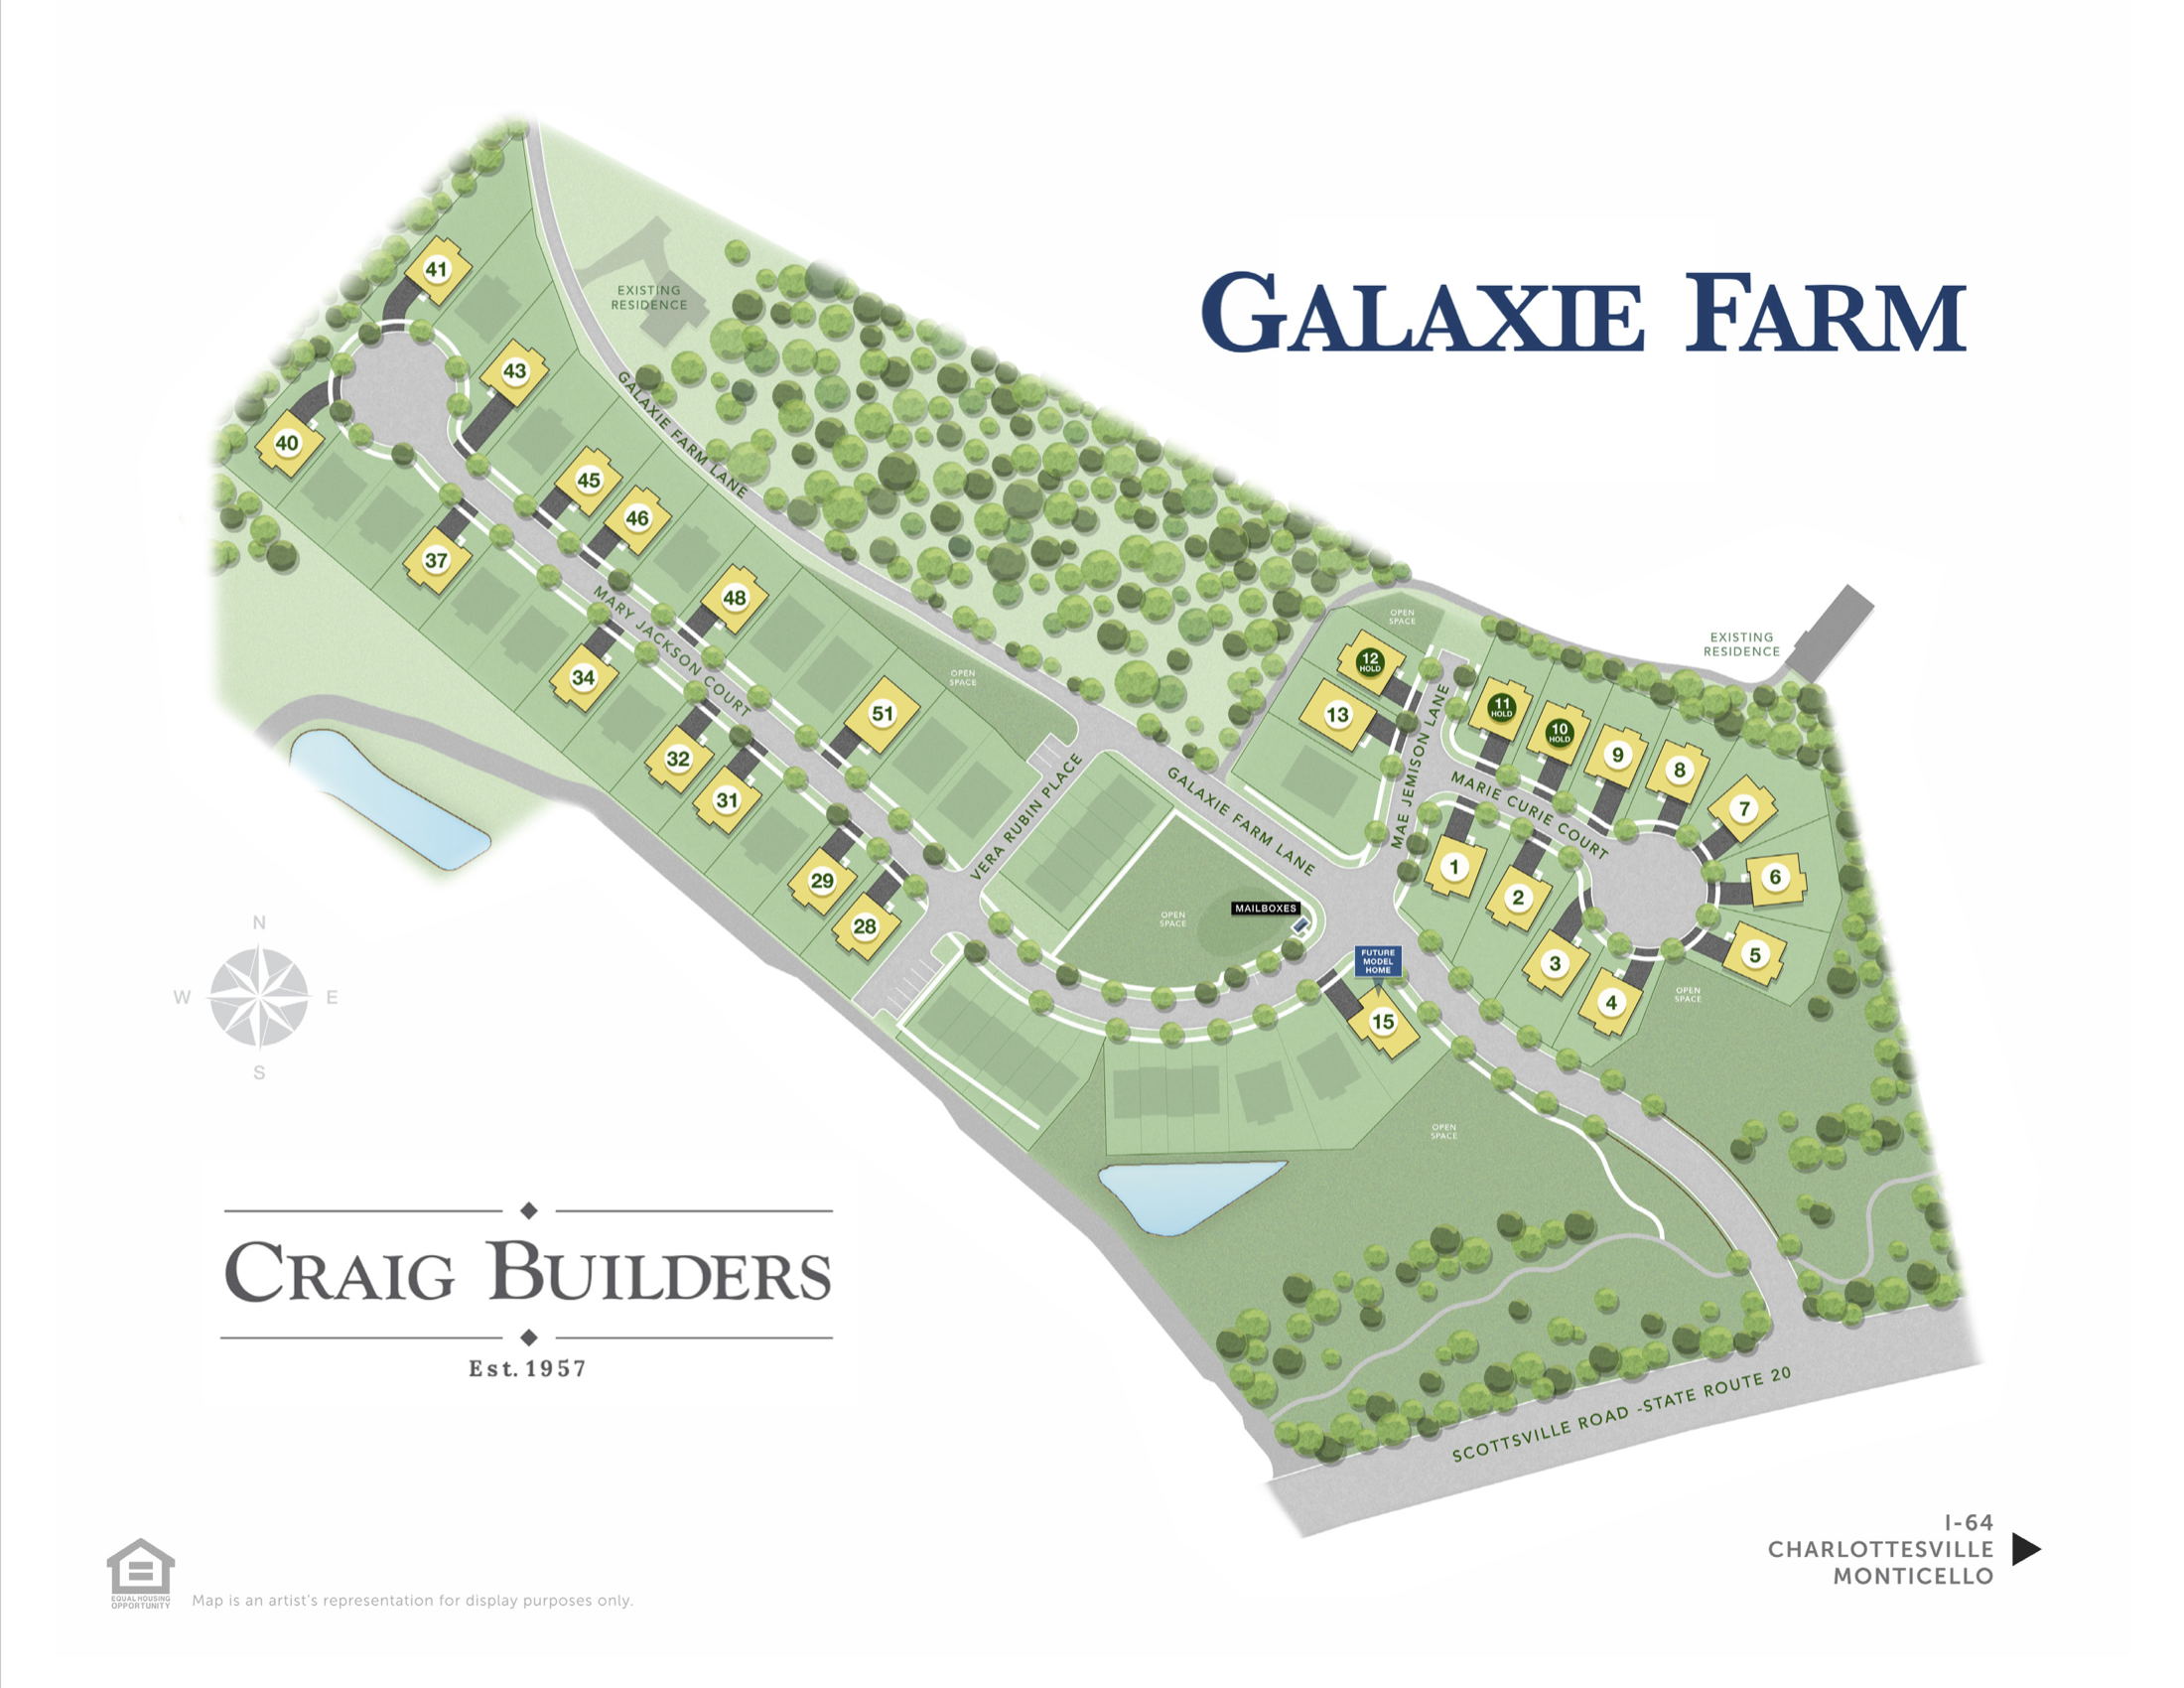 Galaxie Farm Site Map of Homesites to be built by Craig Builders in Charlottesville Va